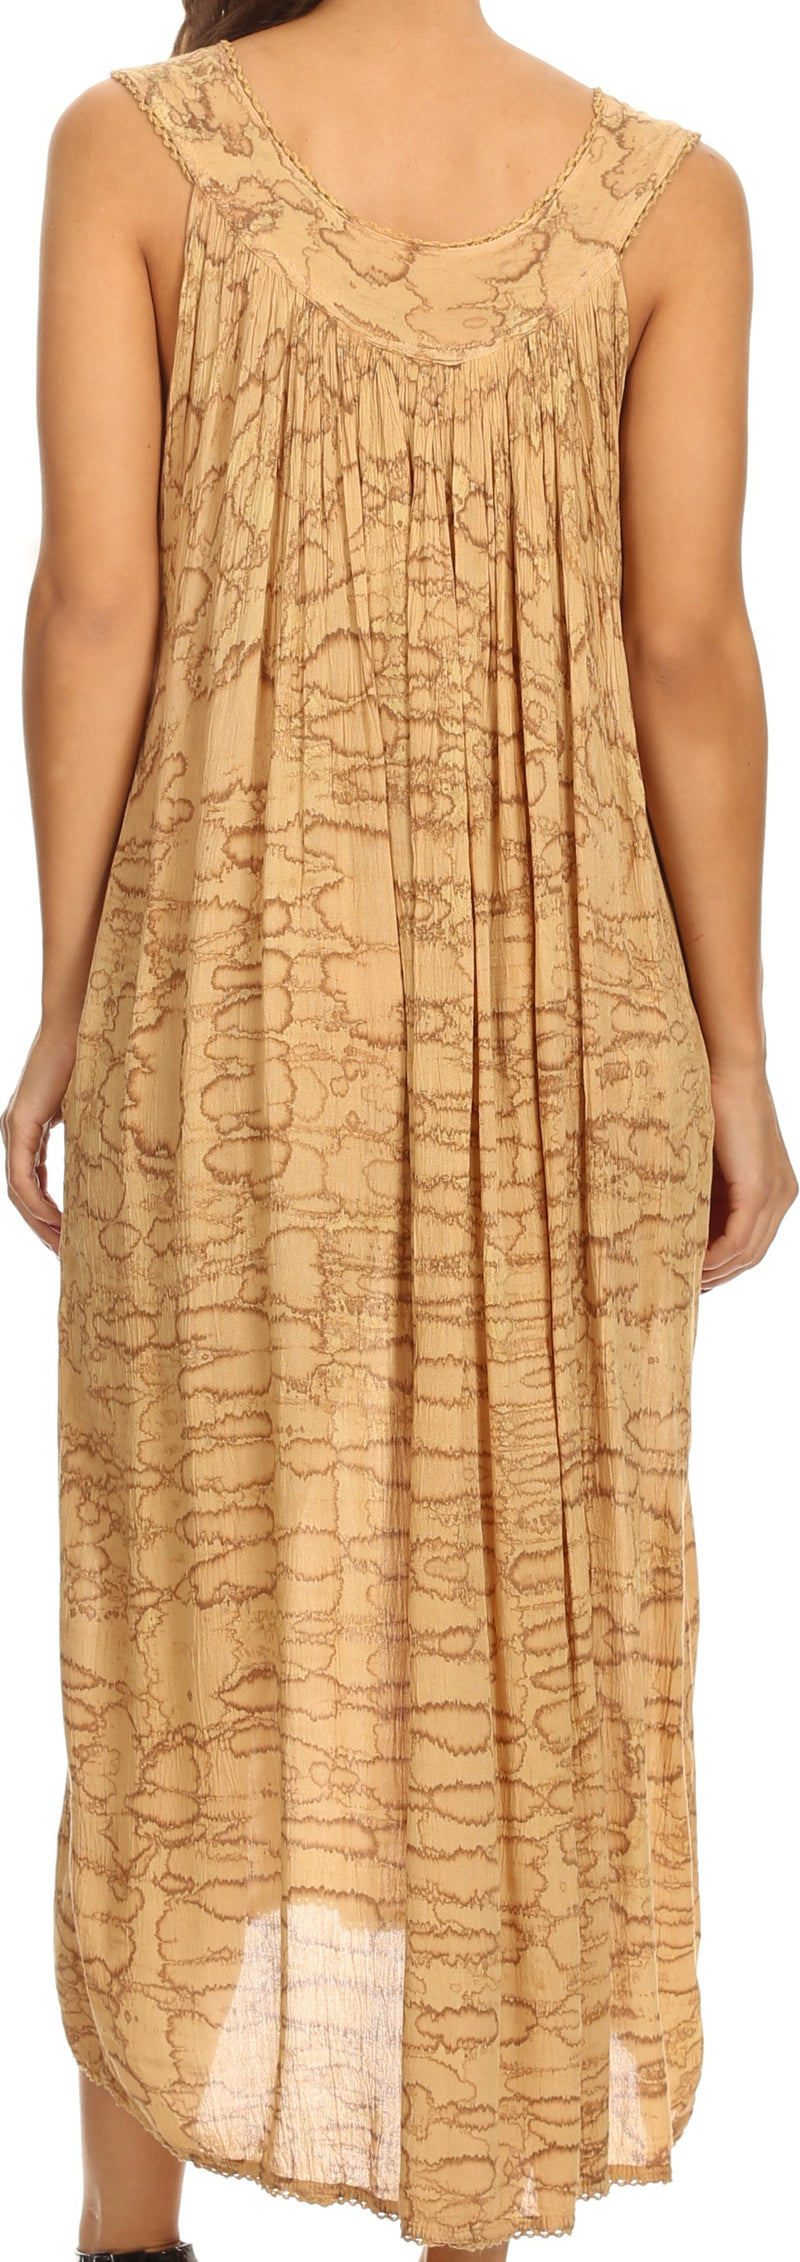 Sakkas Adele Sequin Embroidered Scoop Neck Sleeveless Dress / Cover Up